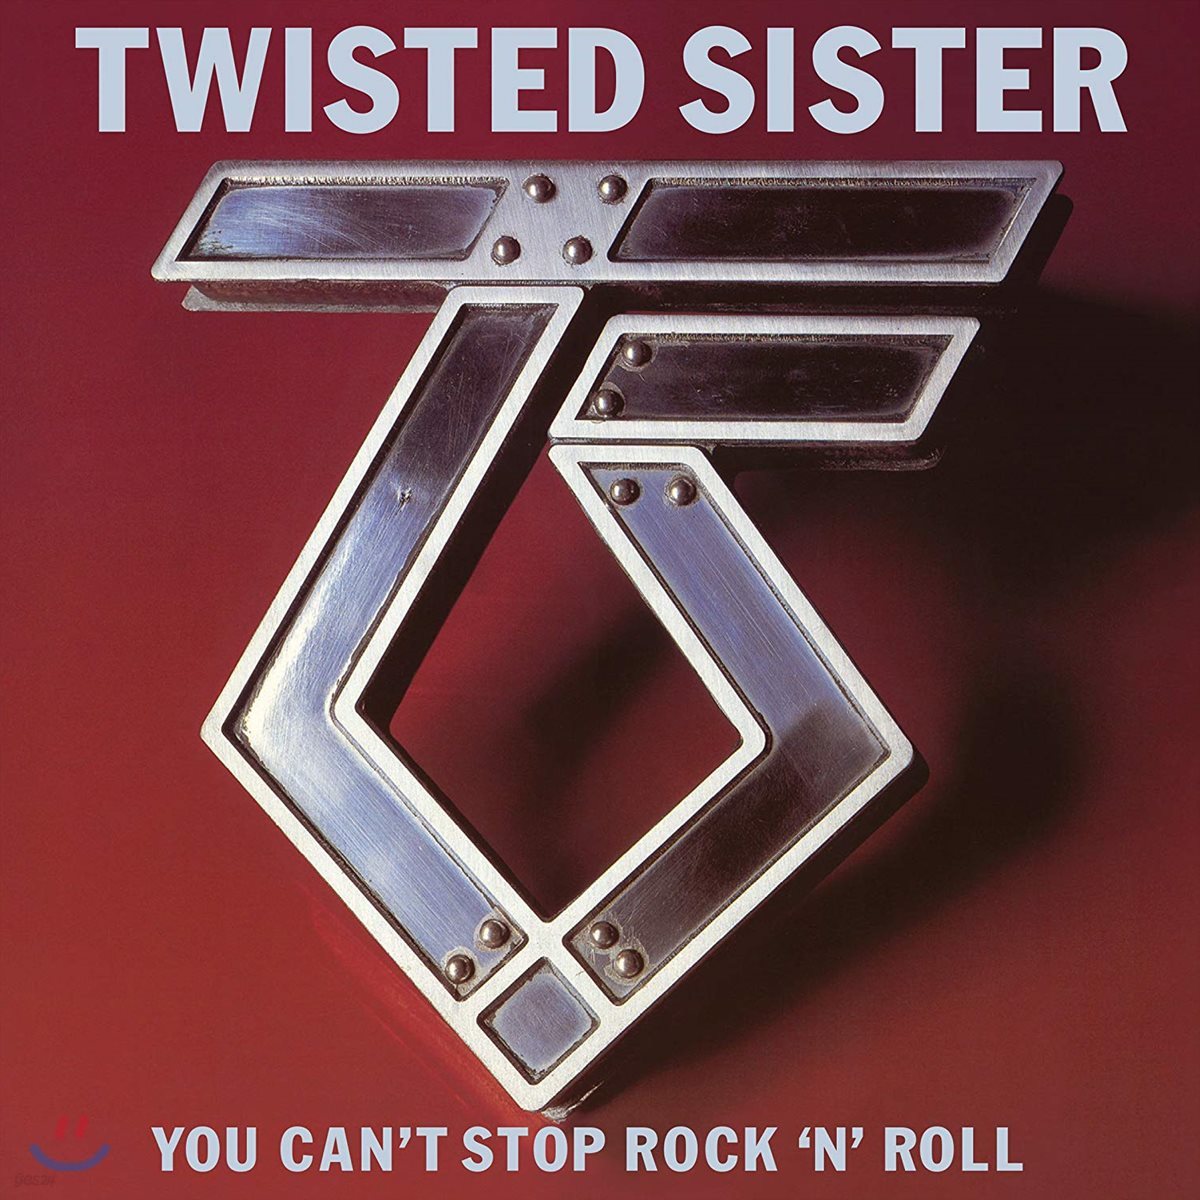 Twisted Sister (트위스티드 시스터) - You Can't Stop Rock 'N' Roll 